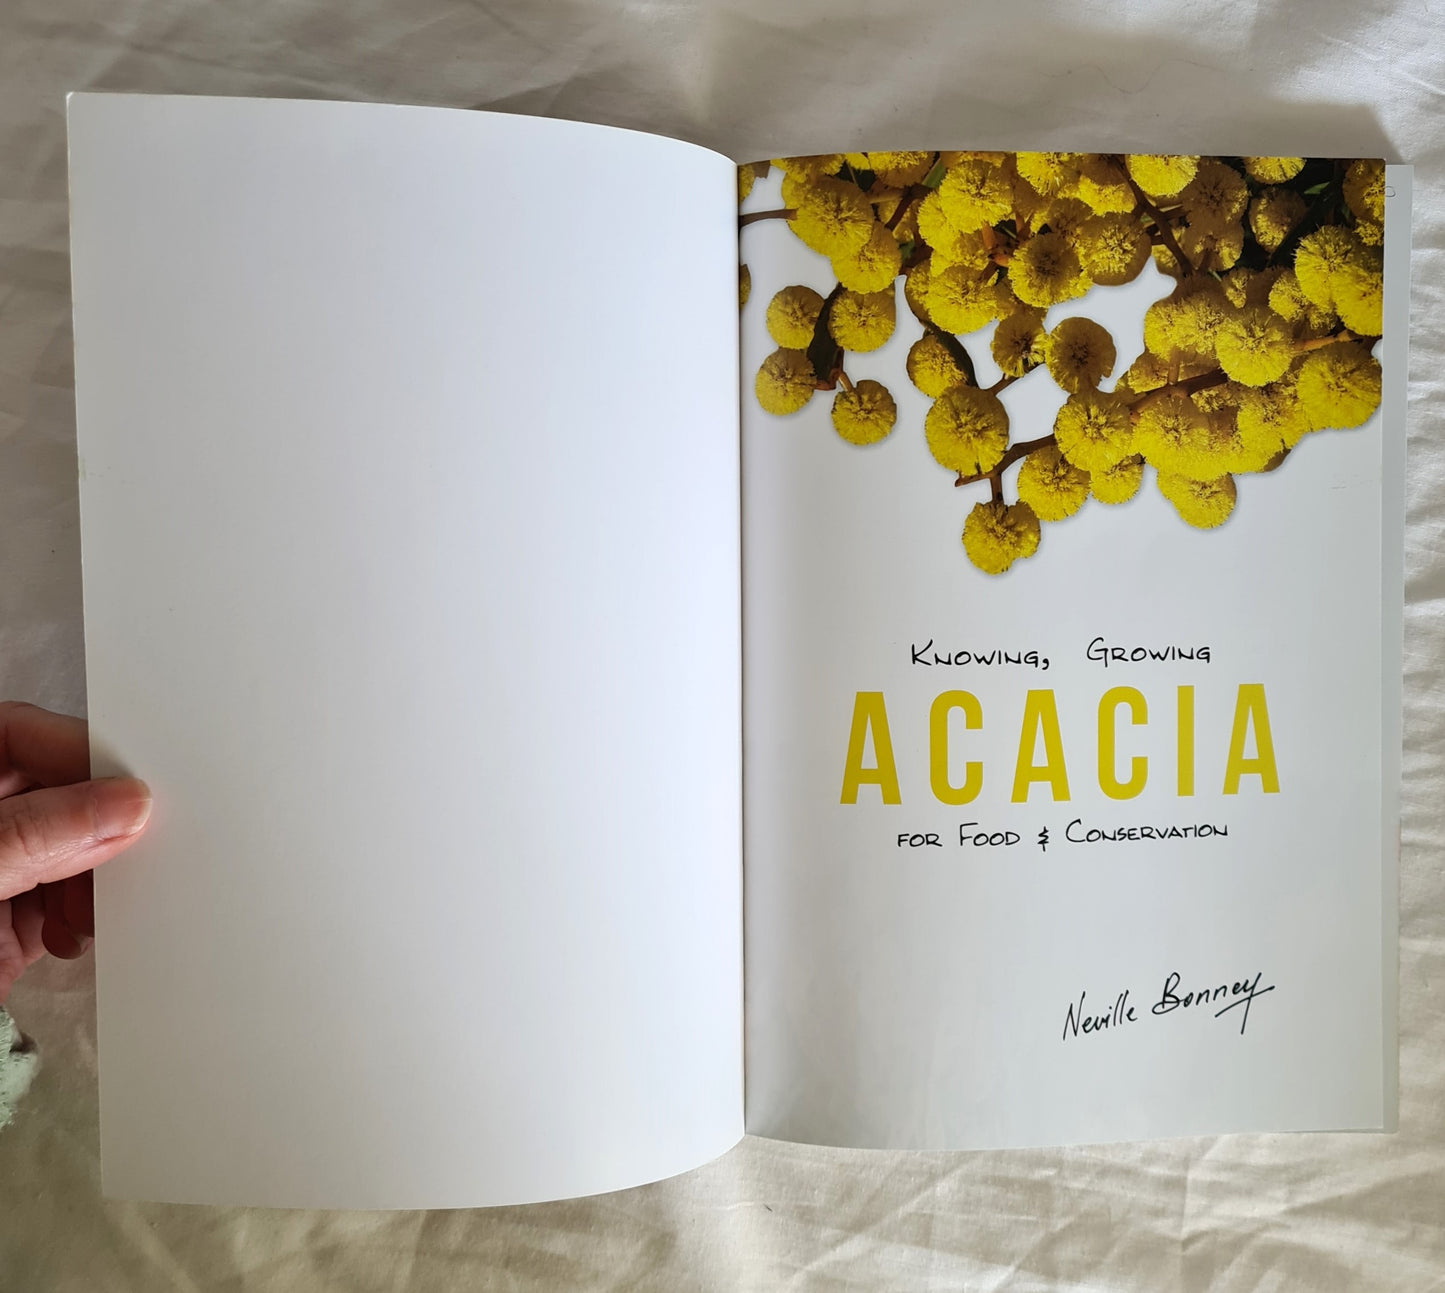 Knowing, Growing Acacia for Food and Conservation by Neville Bonney